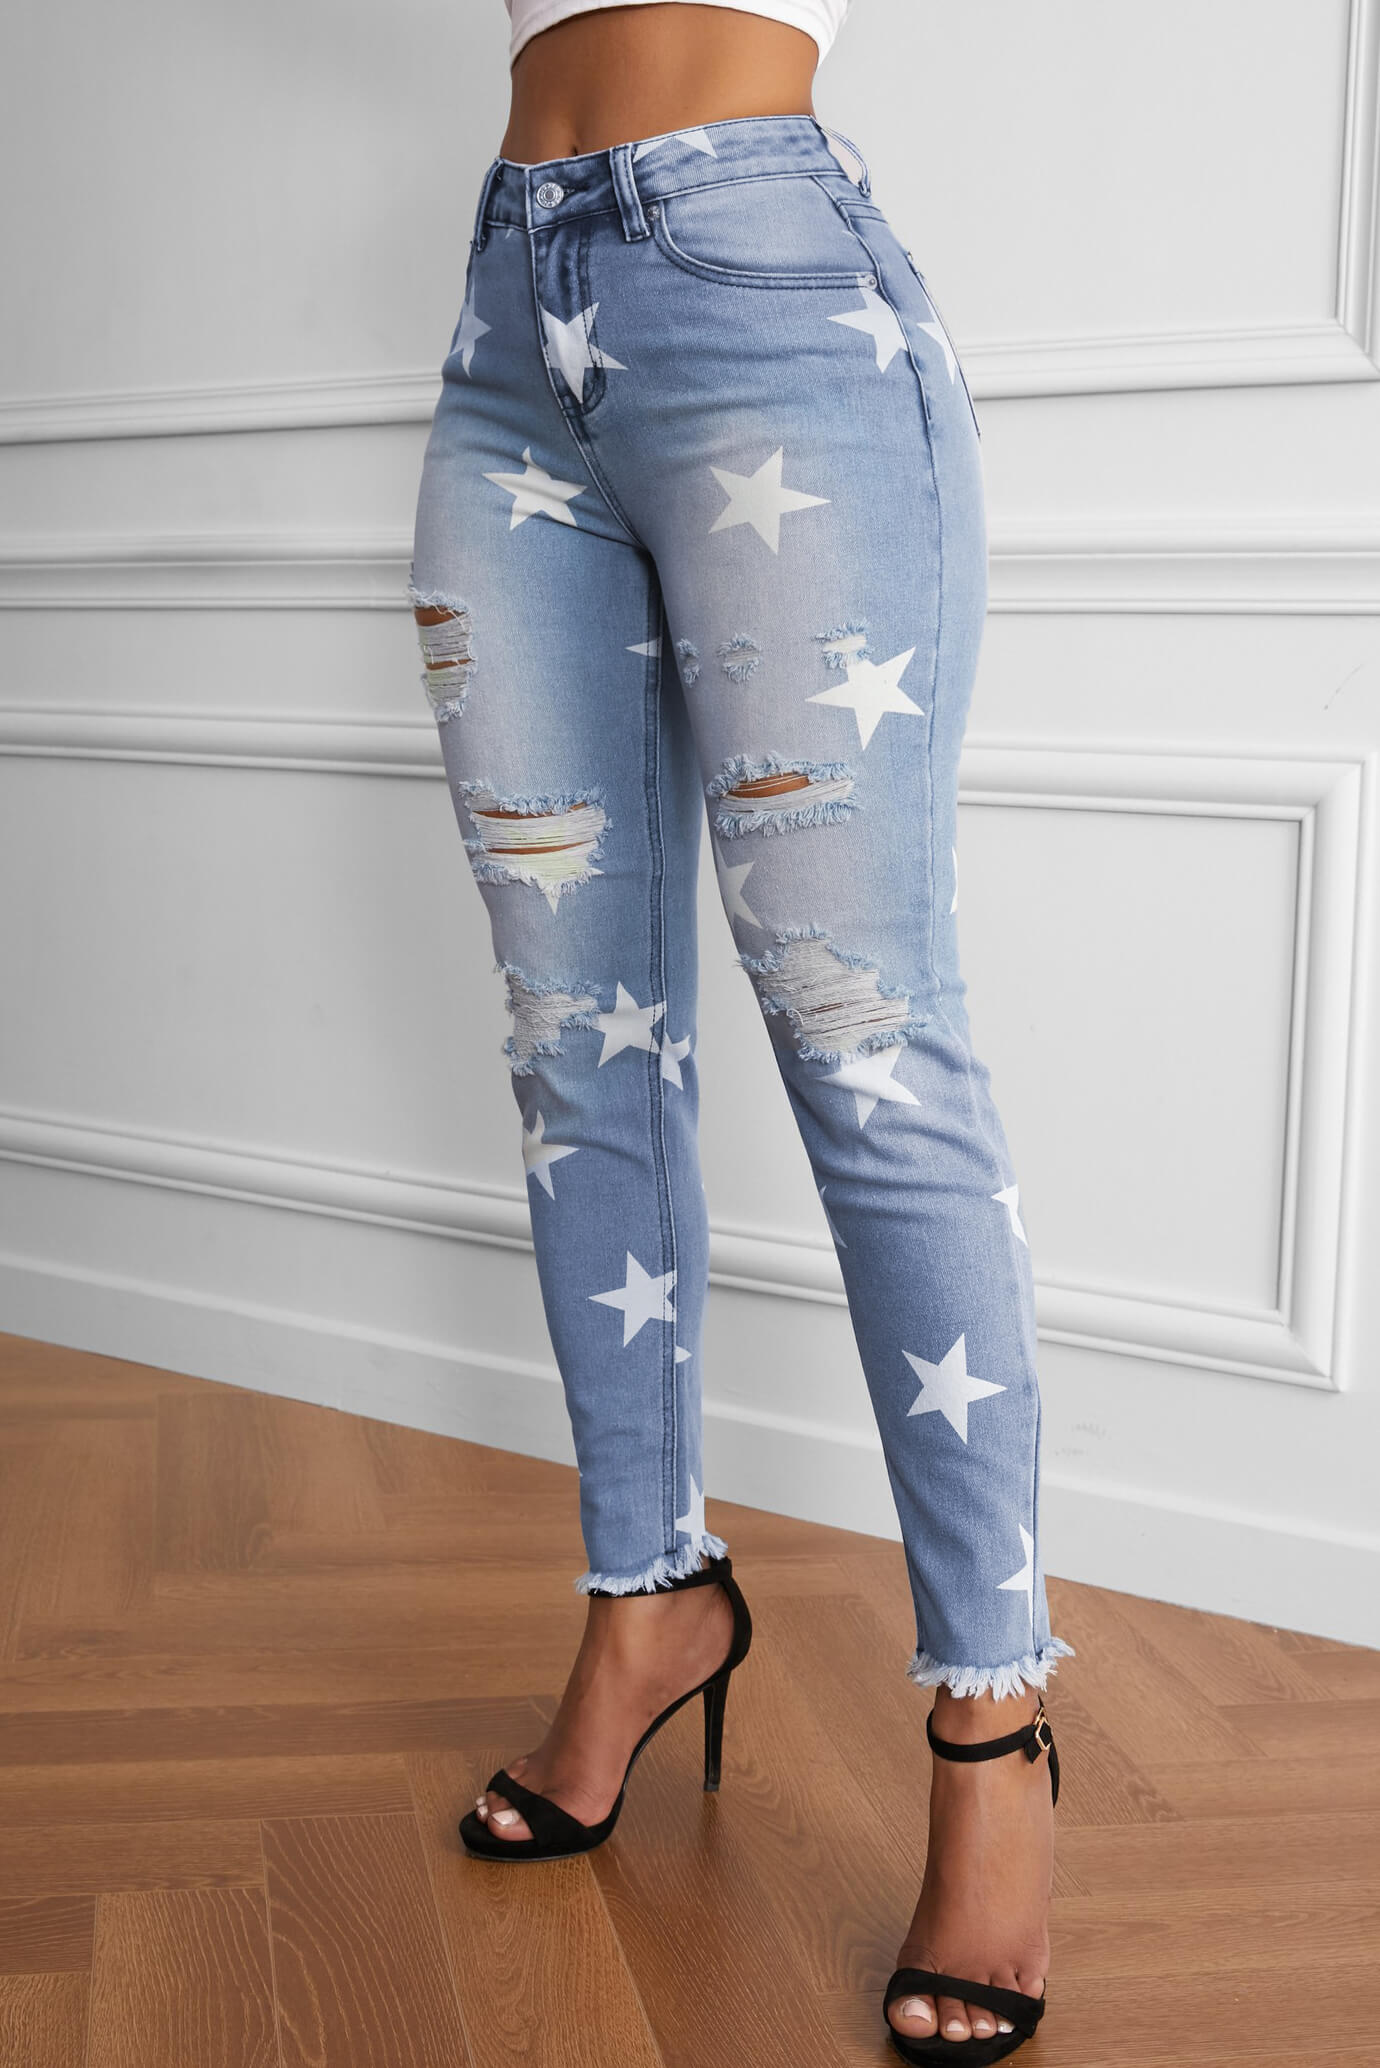 Ripped Star Print Jeans